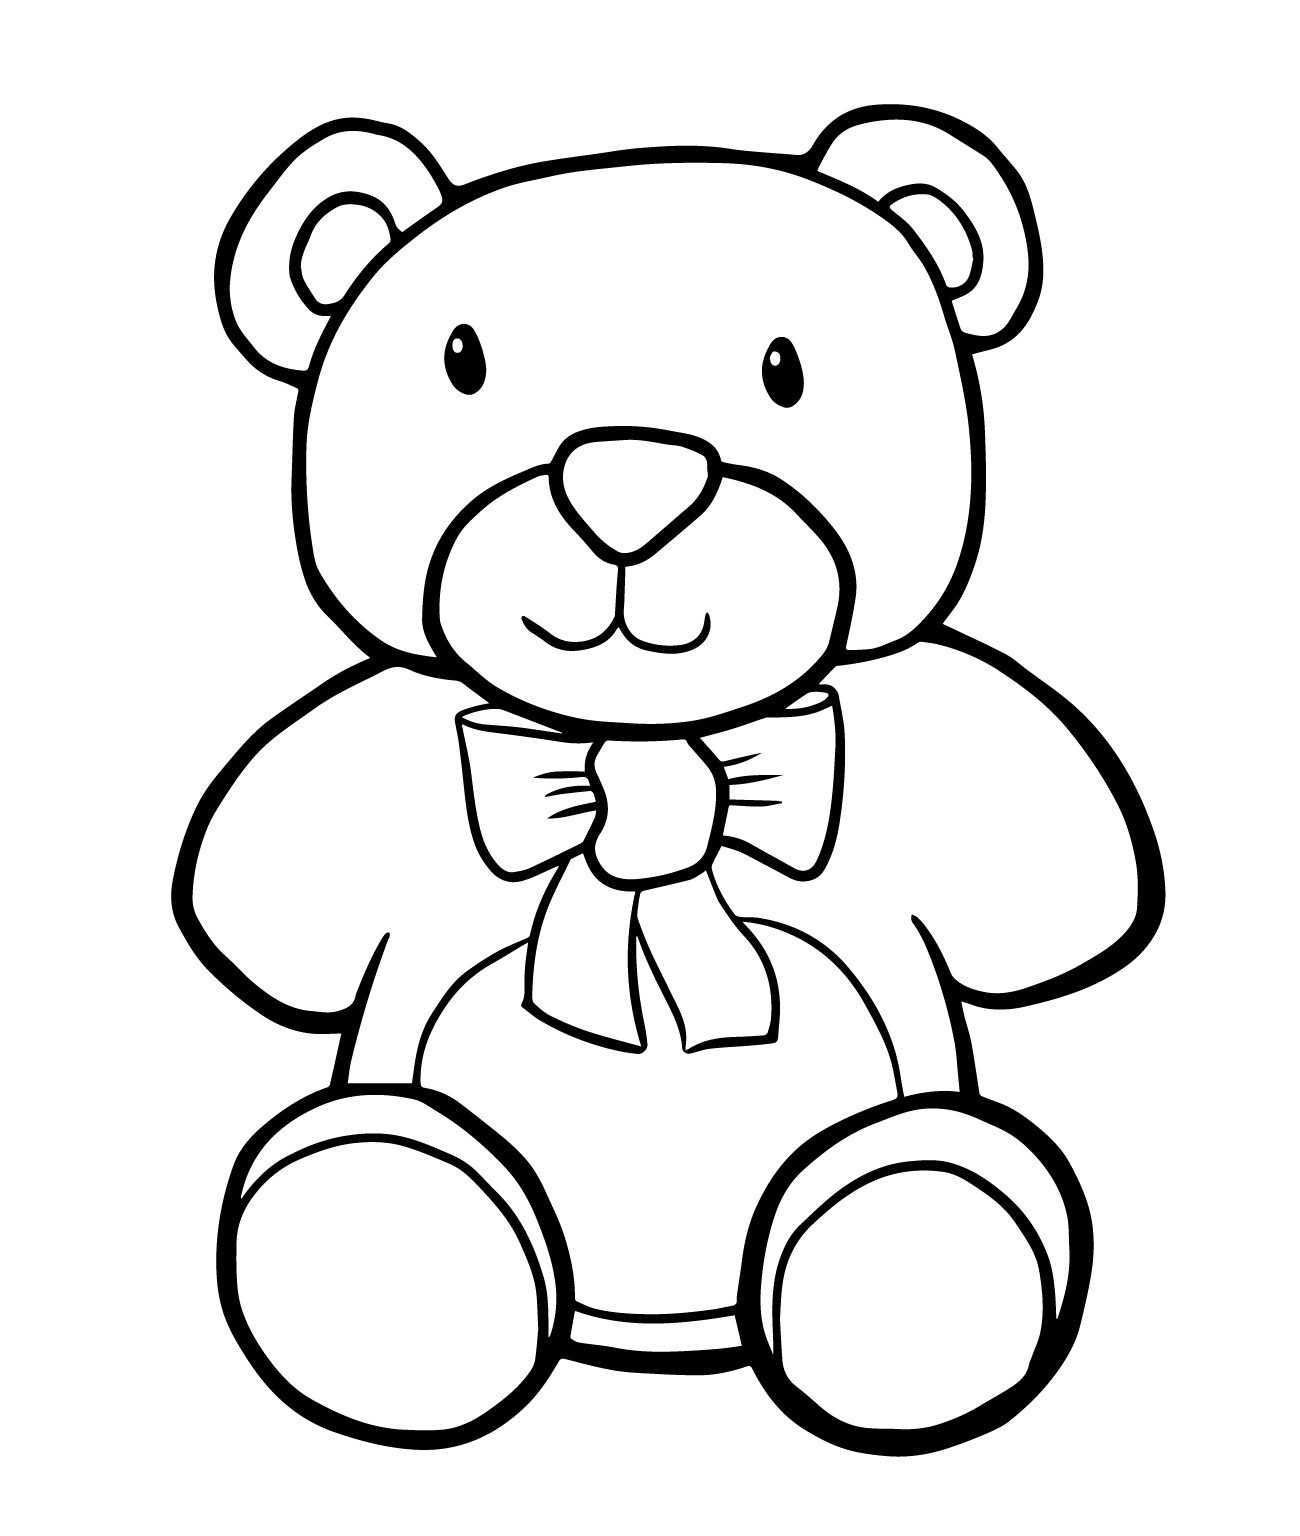 Valentine Teddy Bear Coloring Pages Valentine Bear Coloring Sheet New Valentine S Day Teddy Colouring